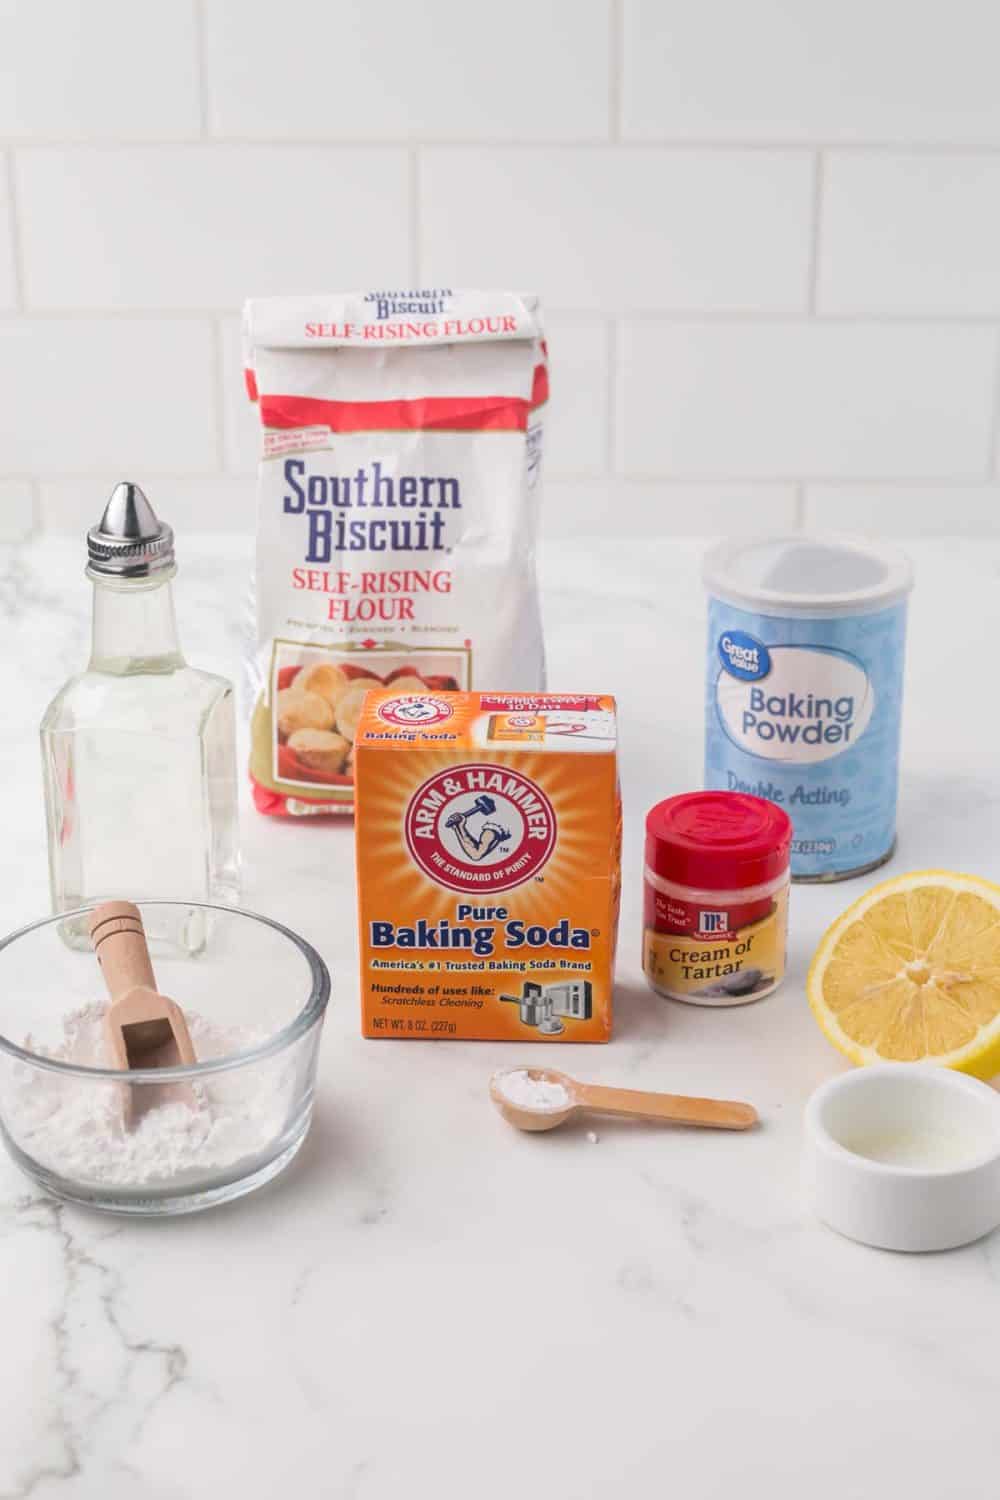 Don't have baking soda? Use these 6 substitutes that show better results!